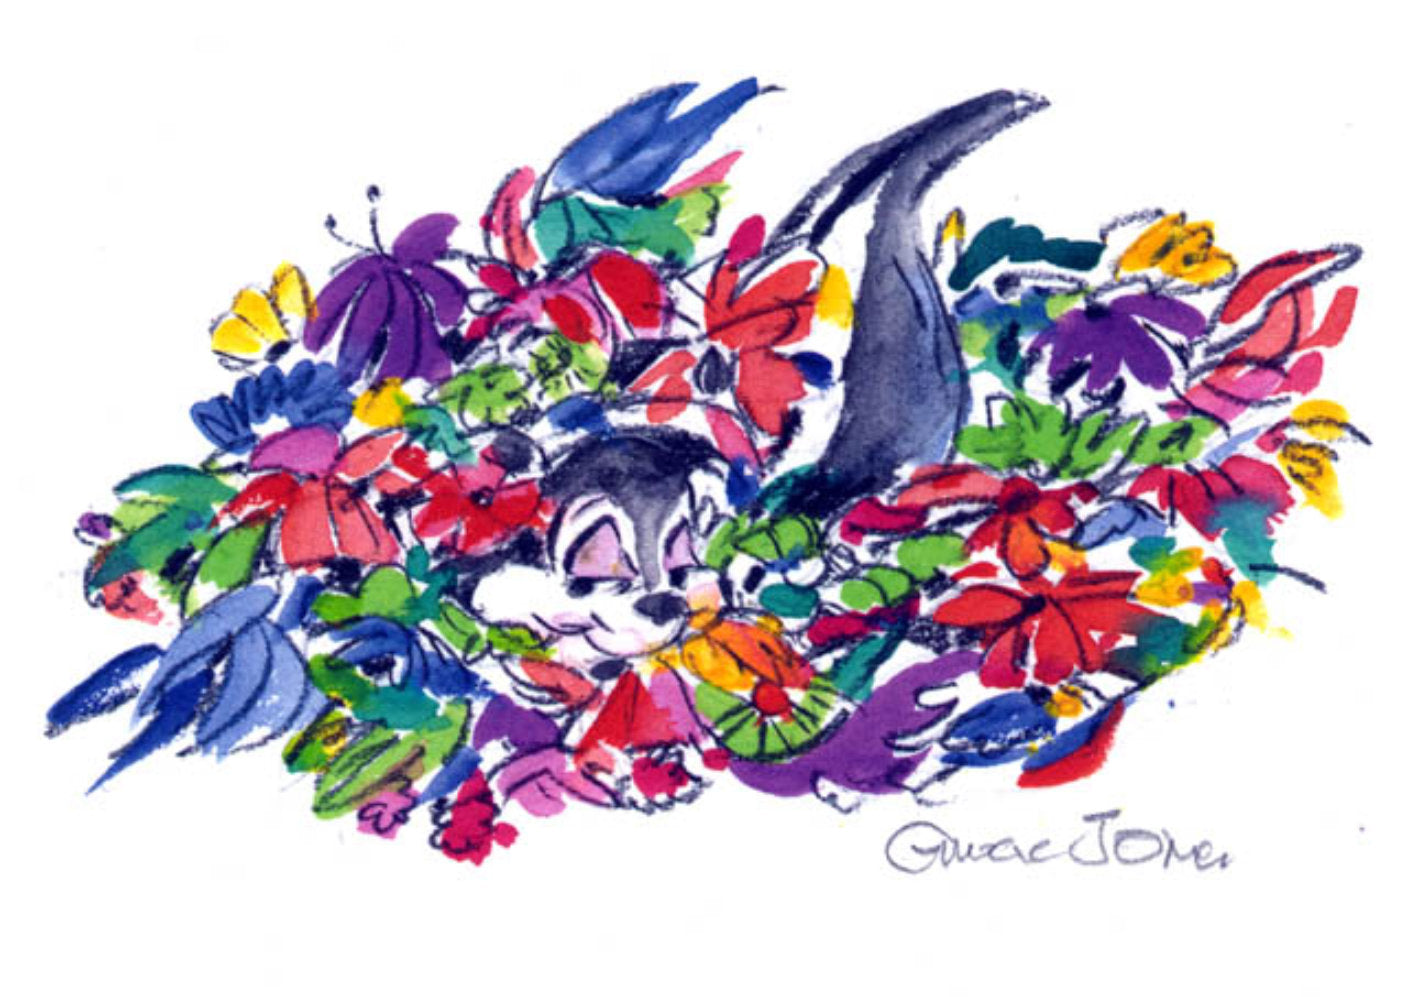 Chuck Jones Pepe Bouquet with Pepe Le Pew Warner Brothers Giclee on Paper Limited Edition of 750